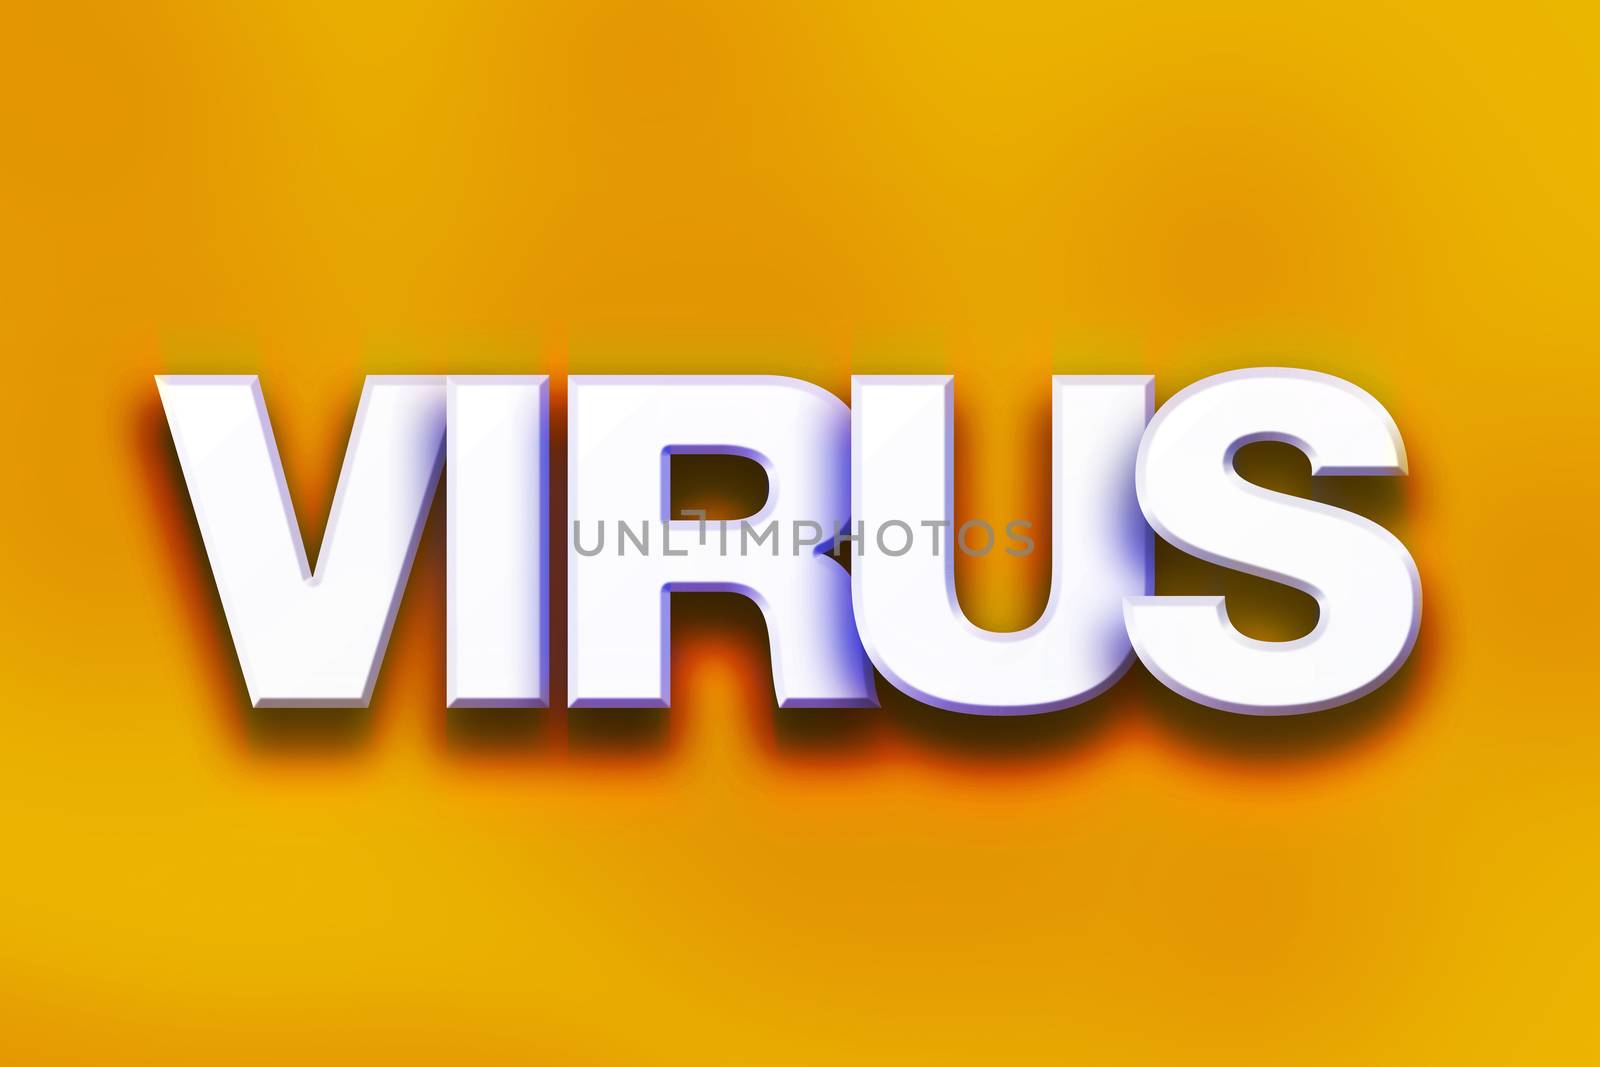 The word "Virus" written in white 3D letters on a colorful background concept and theme.